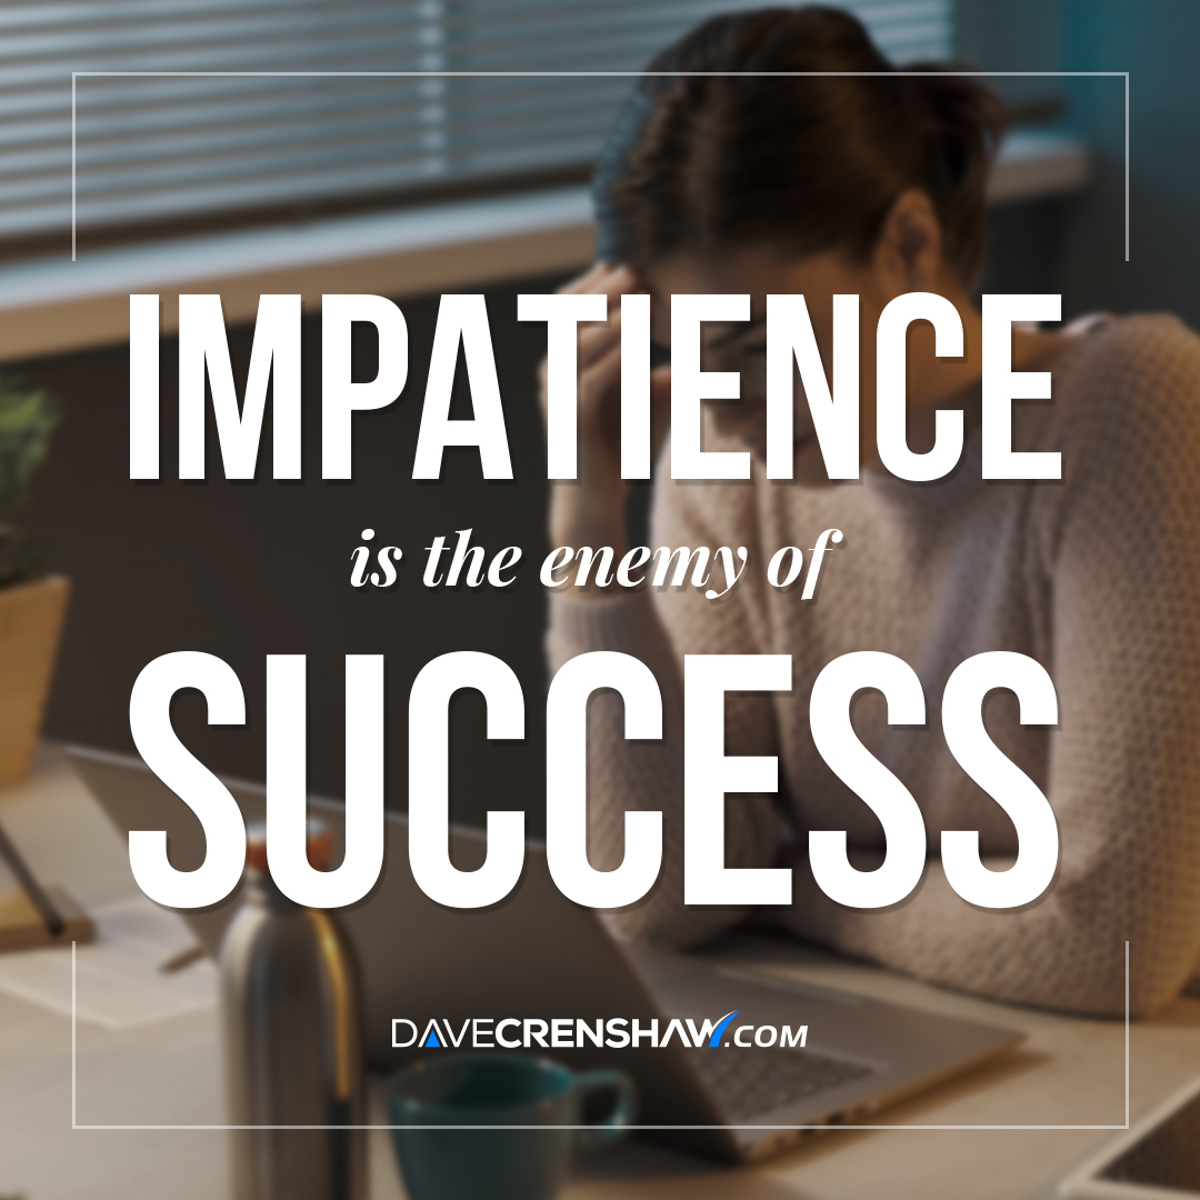 Impatience is the enemy of success